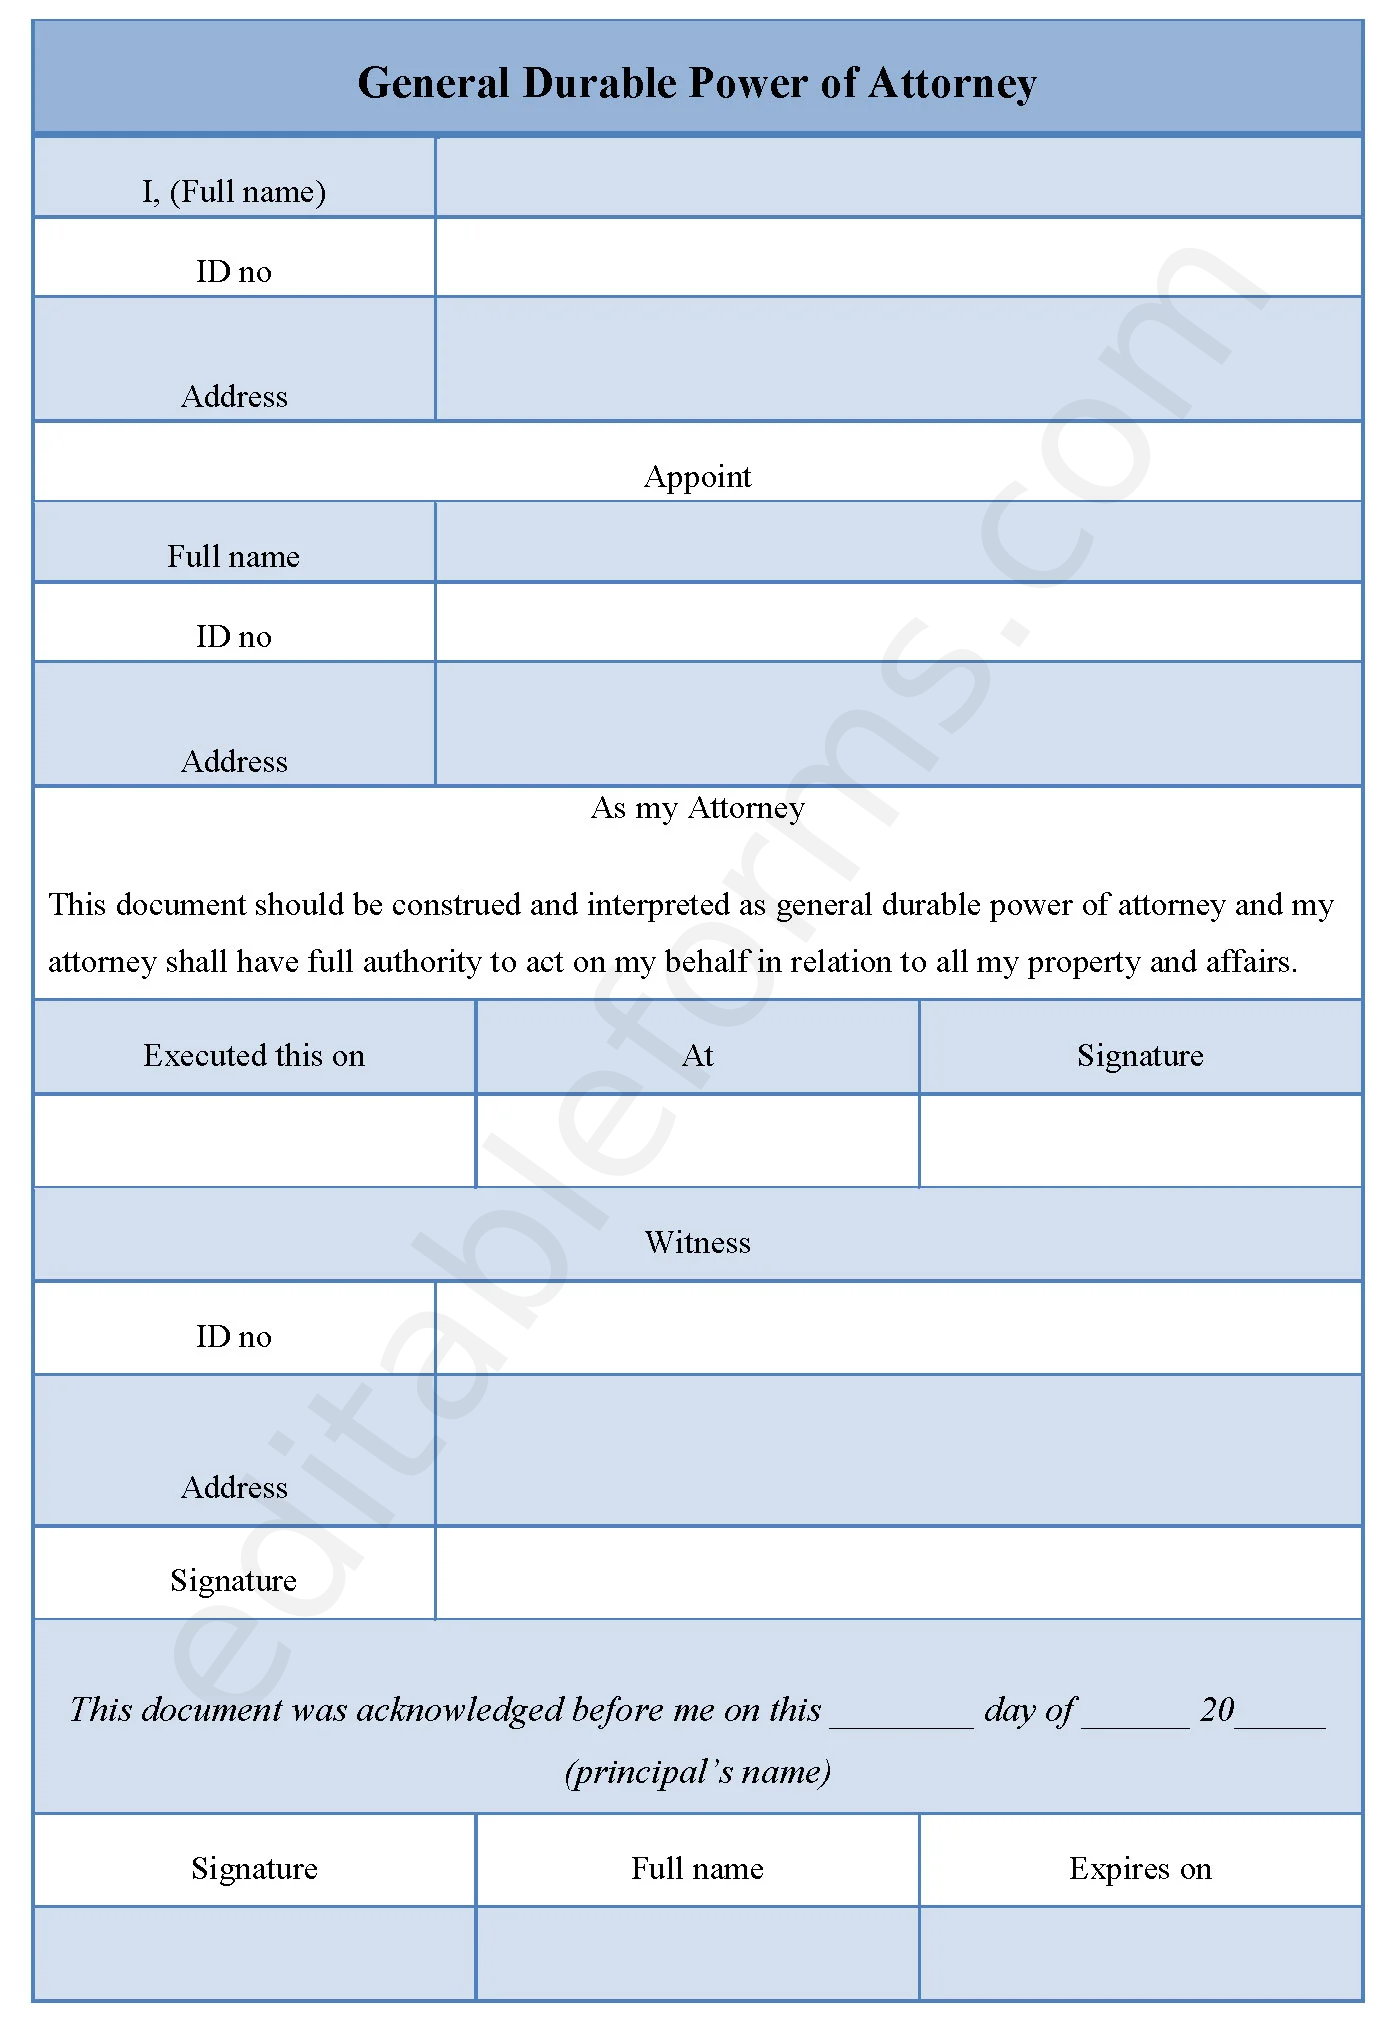 General Durable Power Of Attorney Fillable PDF Template